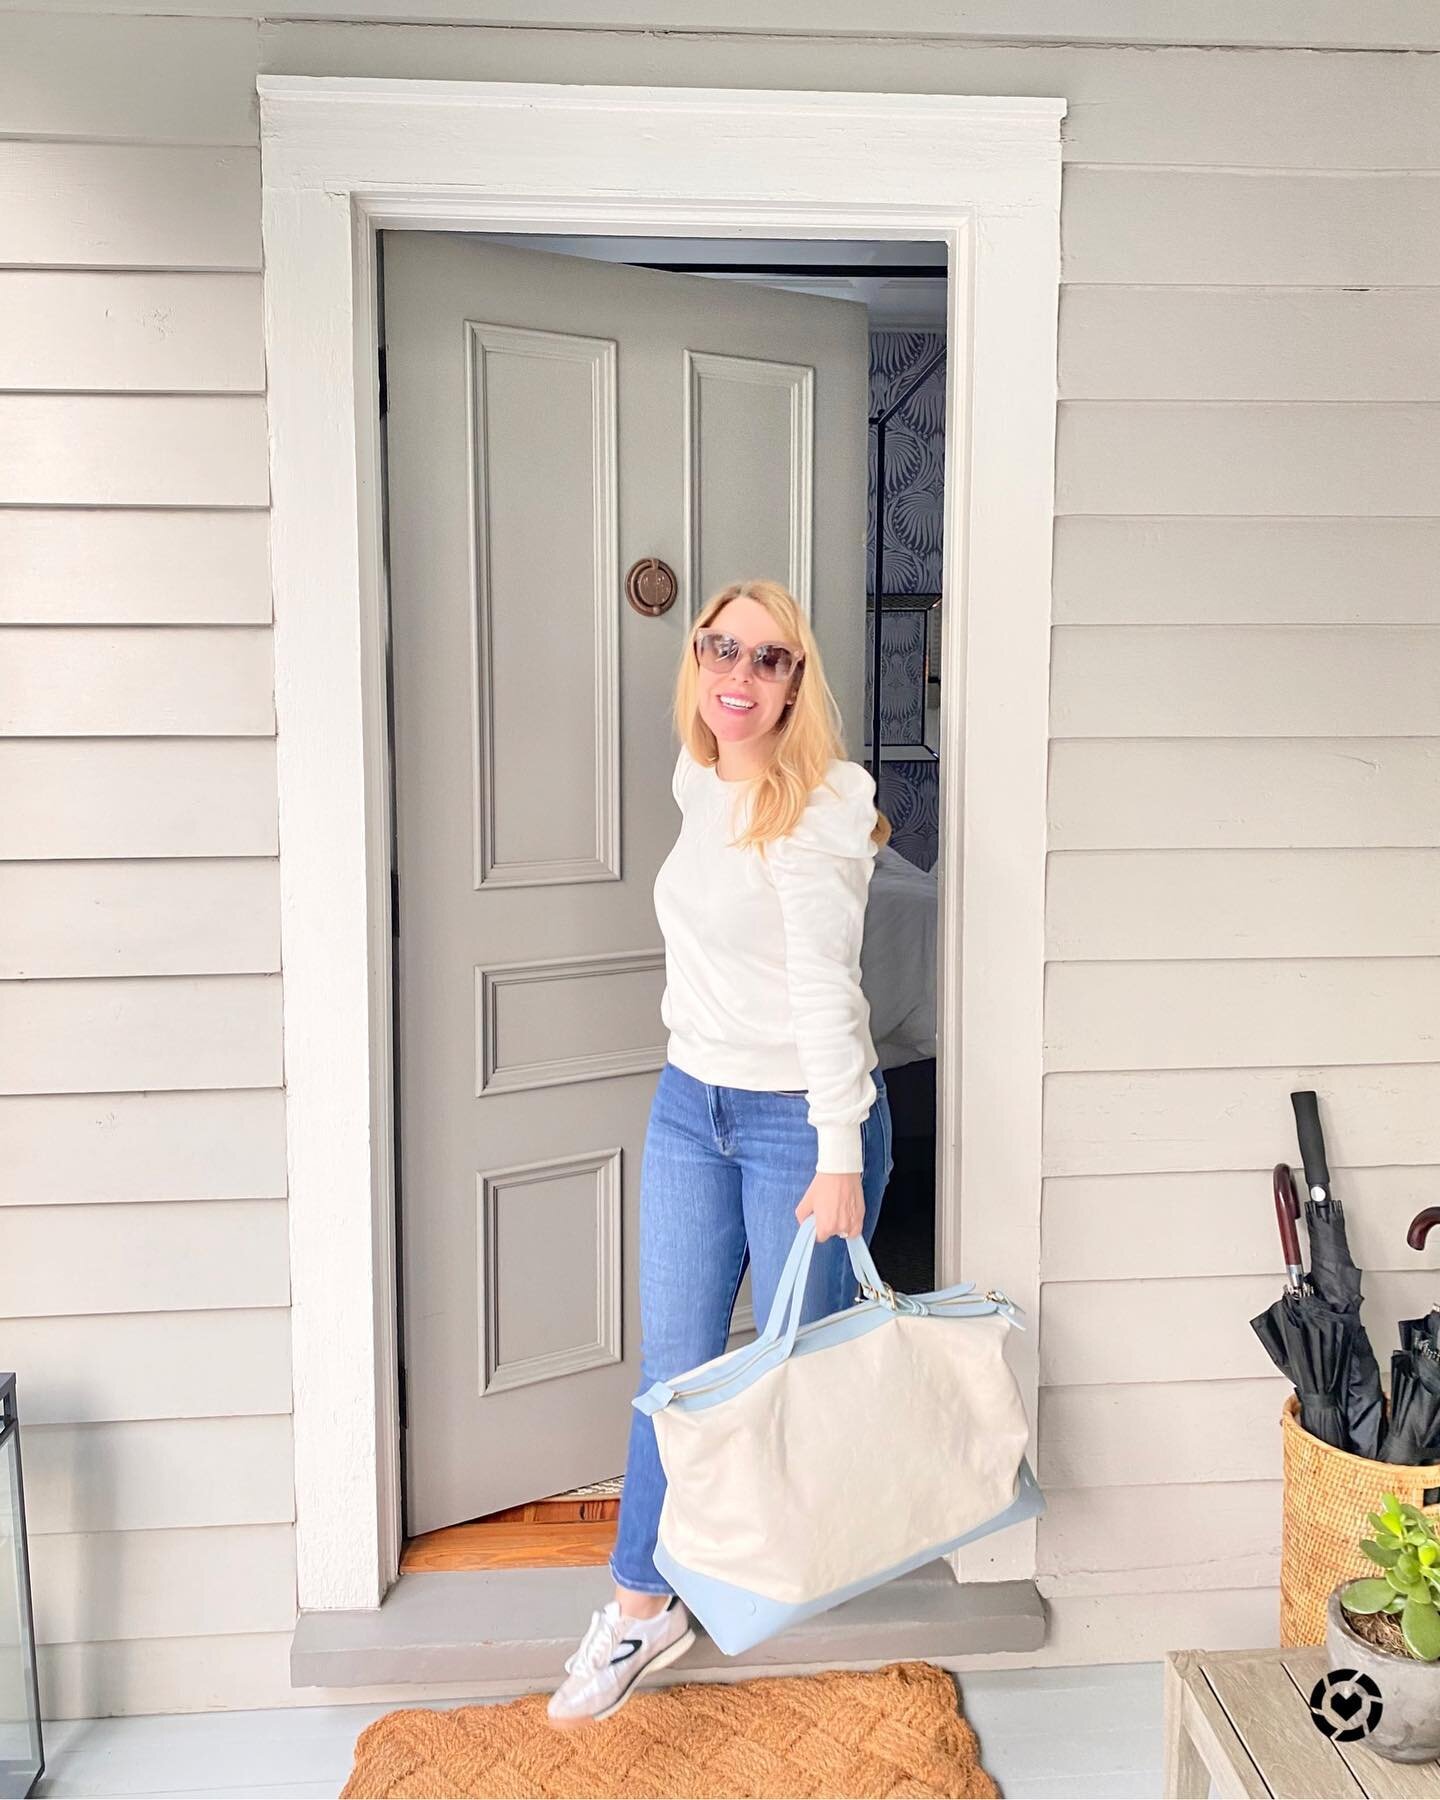 Let&rsquo;s go someplace!  We are currently planning out our travel for 2021. What cities and resorts are on your list for this year? I am linking my favorite weekenders and travel totes here ➡️ http://liketk.it/39yvX  to get you excited about packin